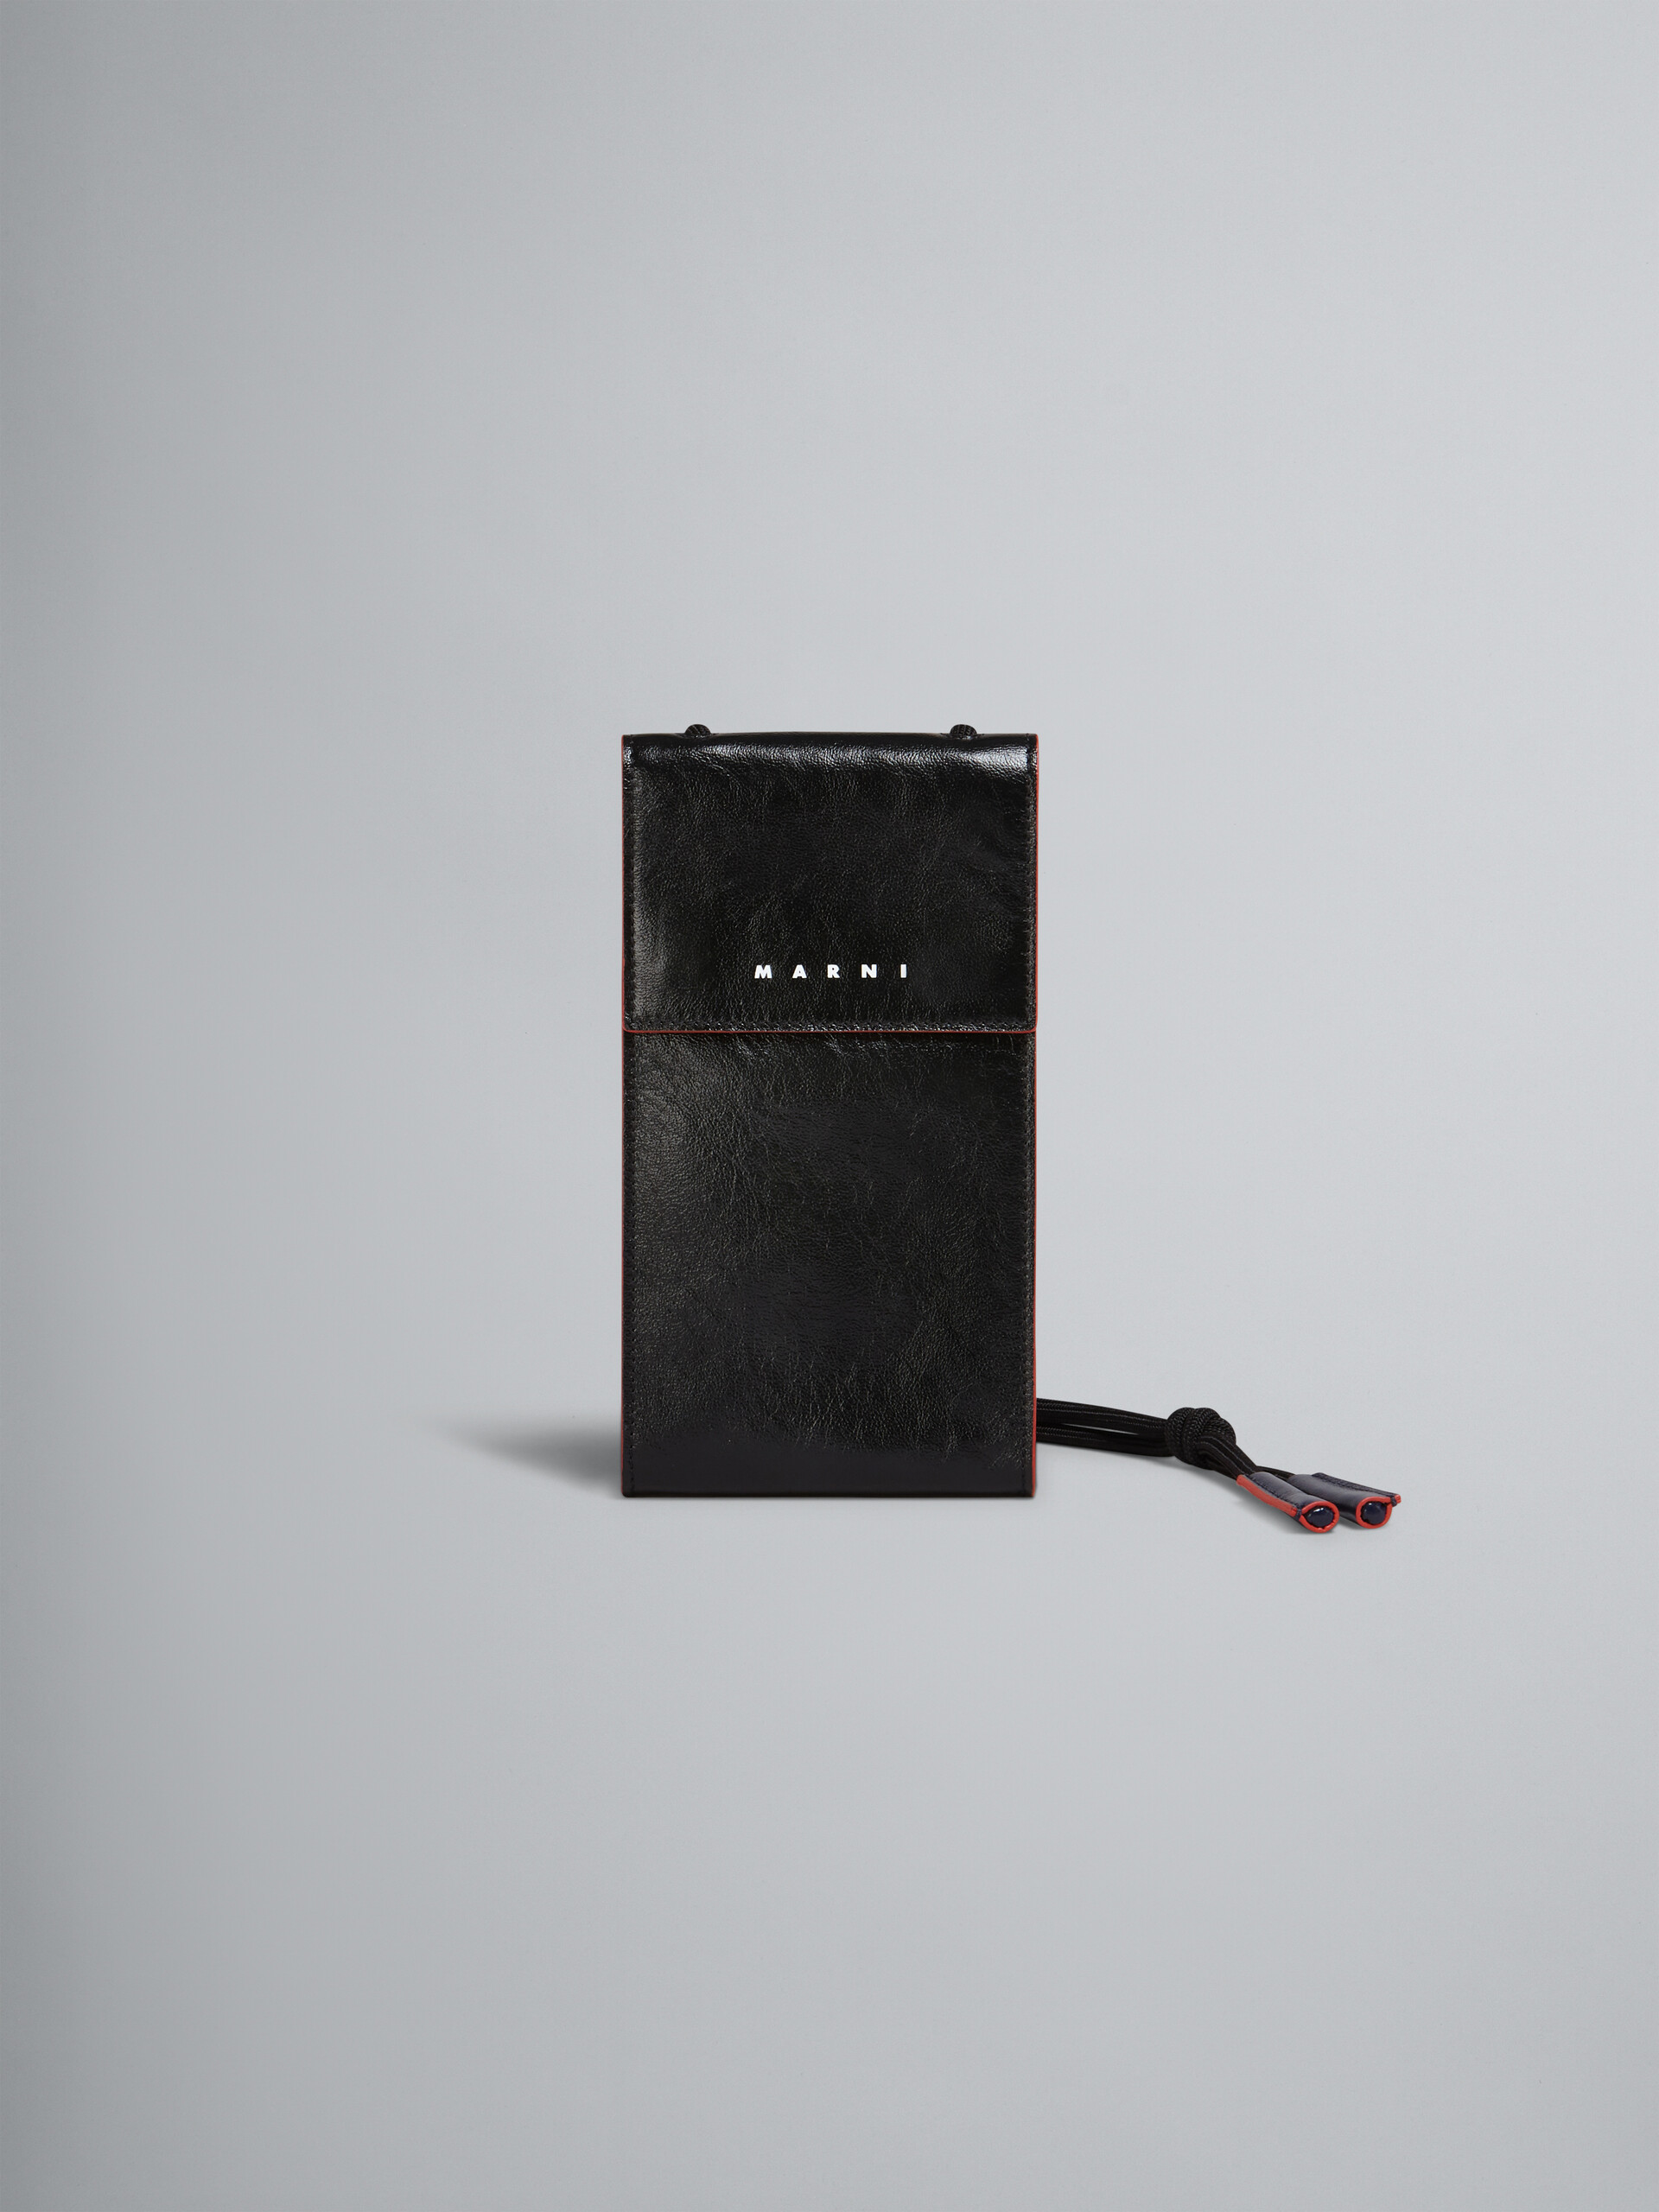 Black shiny leather phone case - Wallets and Small Leather Goods - Image 1